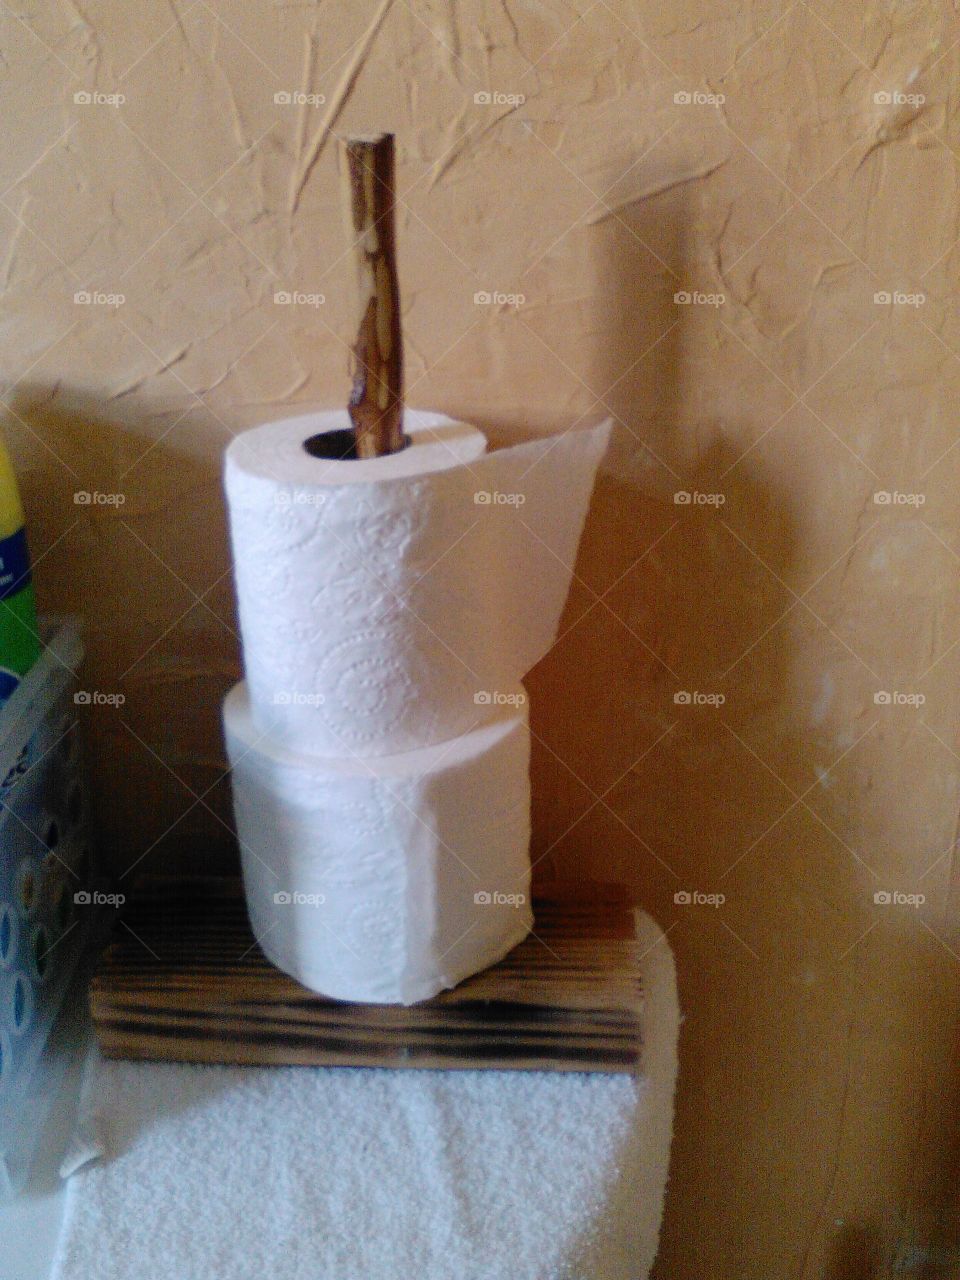 Handmade toilet paper holder. I made this out of tree sticks an wood.